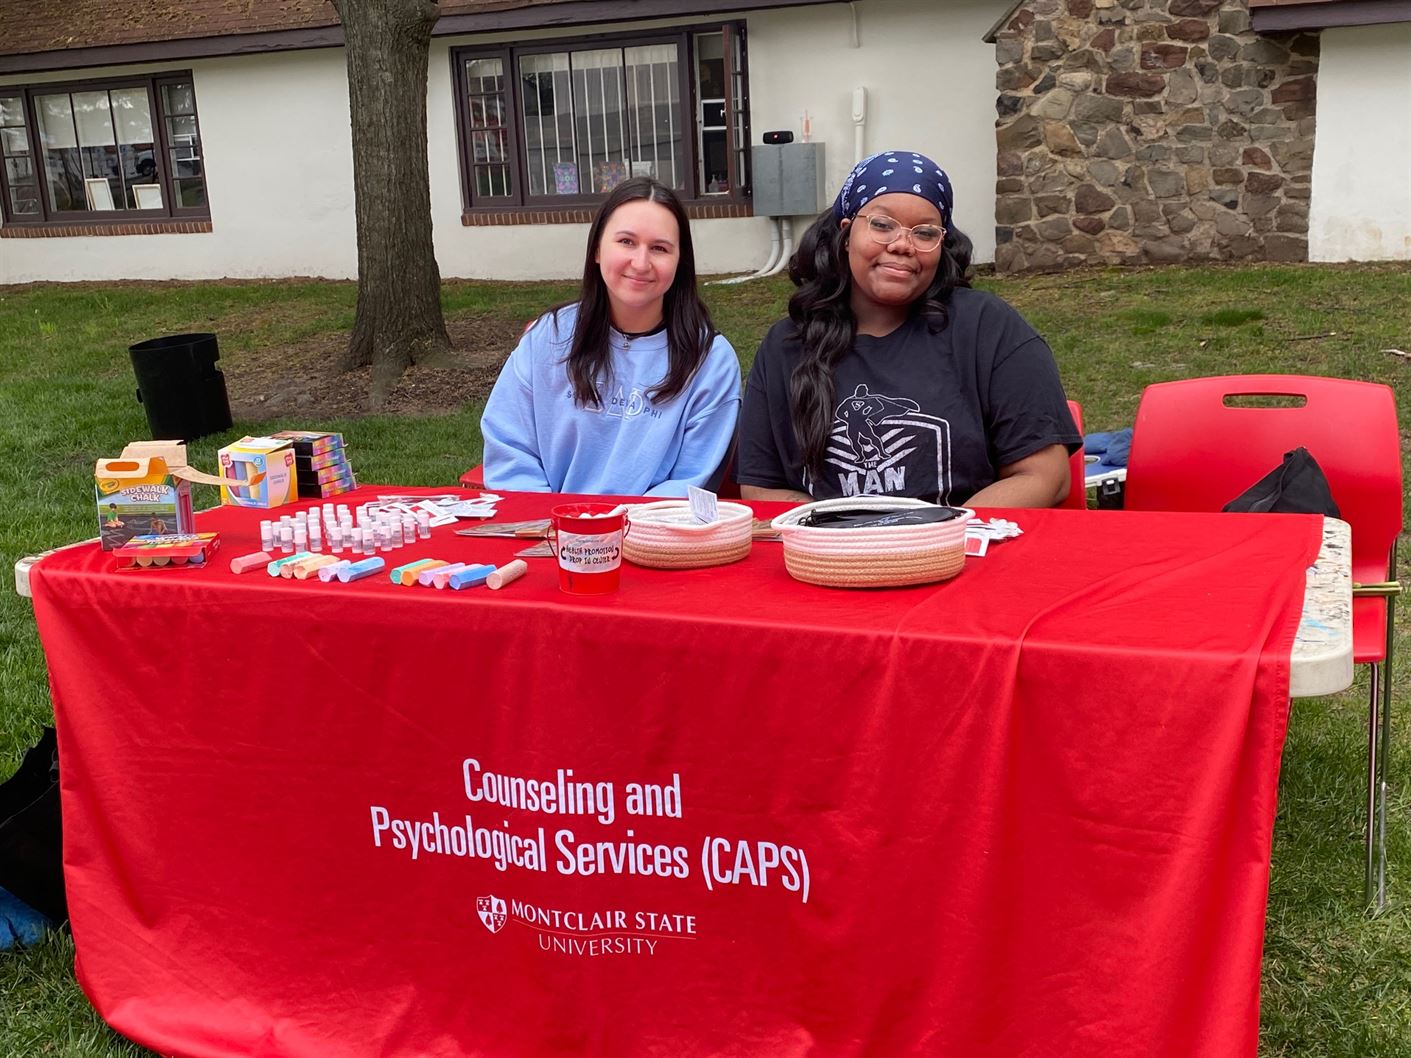 Peer advocates from Counseling and Psychological Services (CAPS) were giving out goodies to students and were able to chat with students.
Kamil Santana | The Montclarion